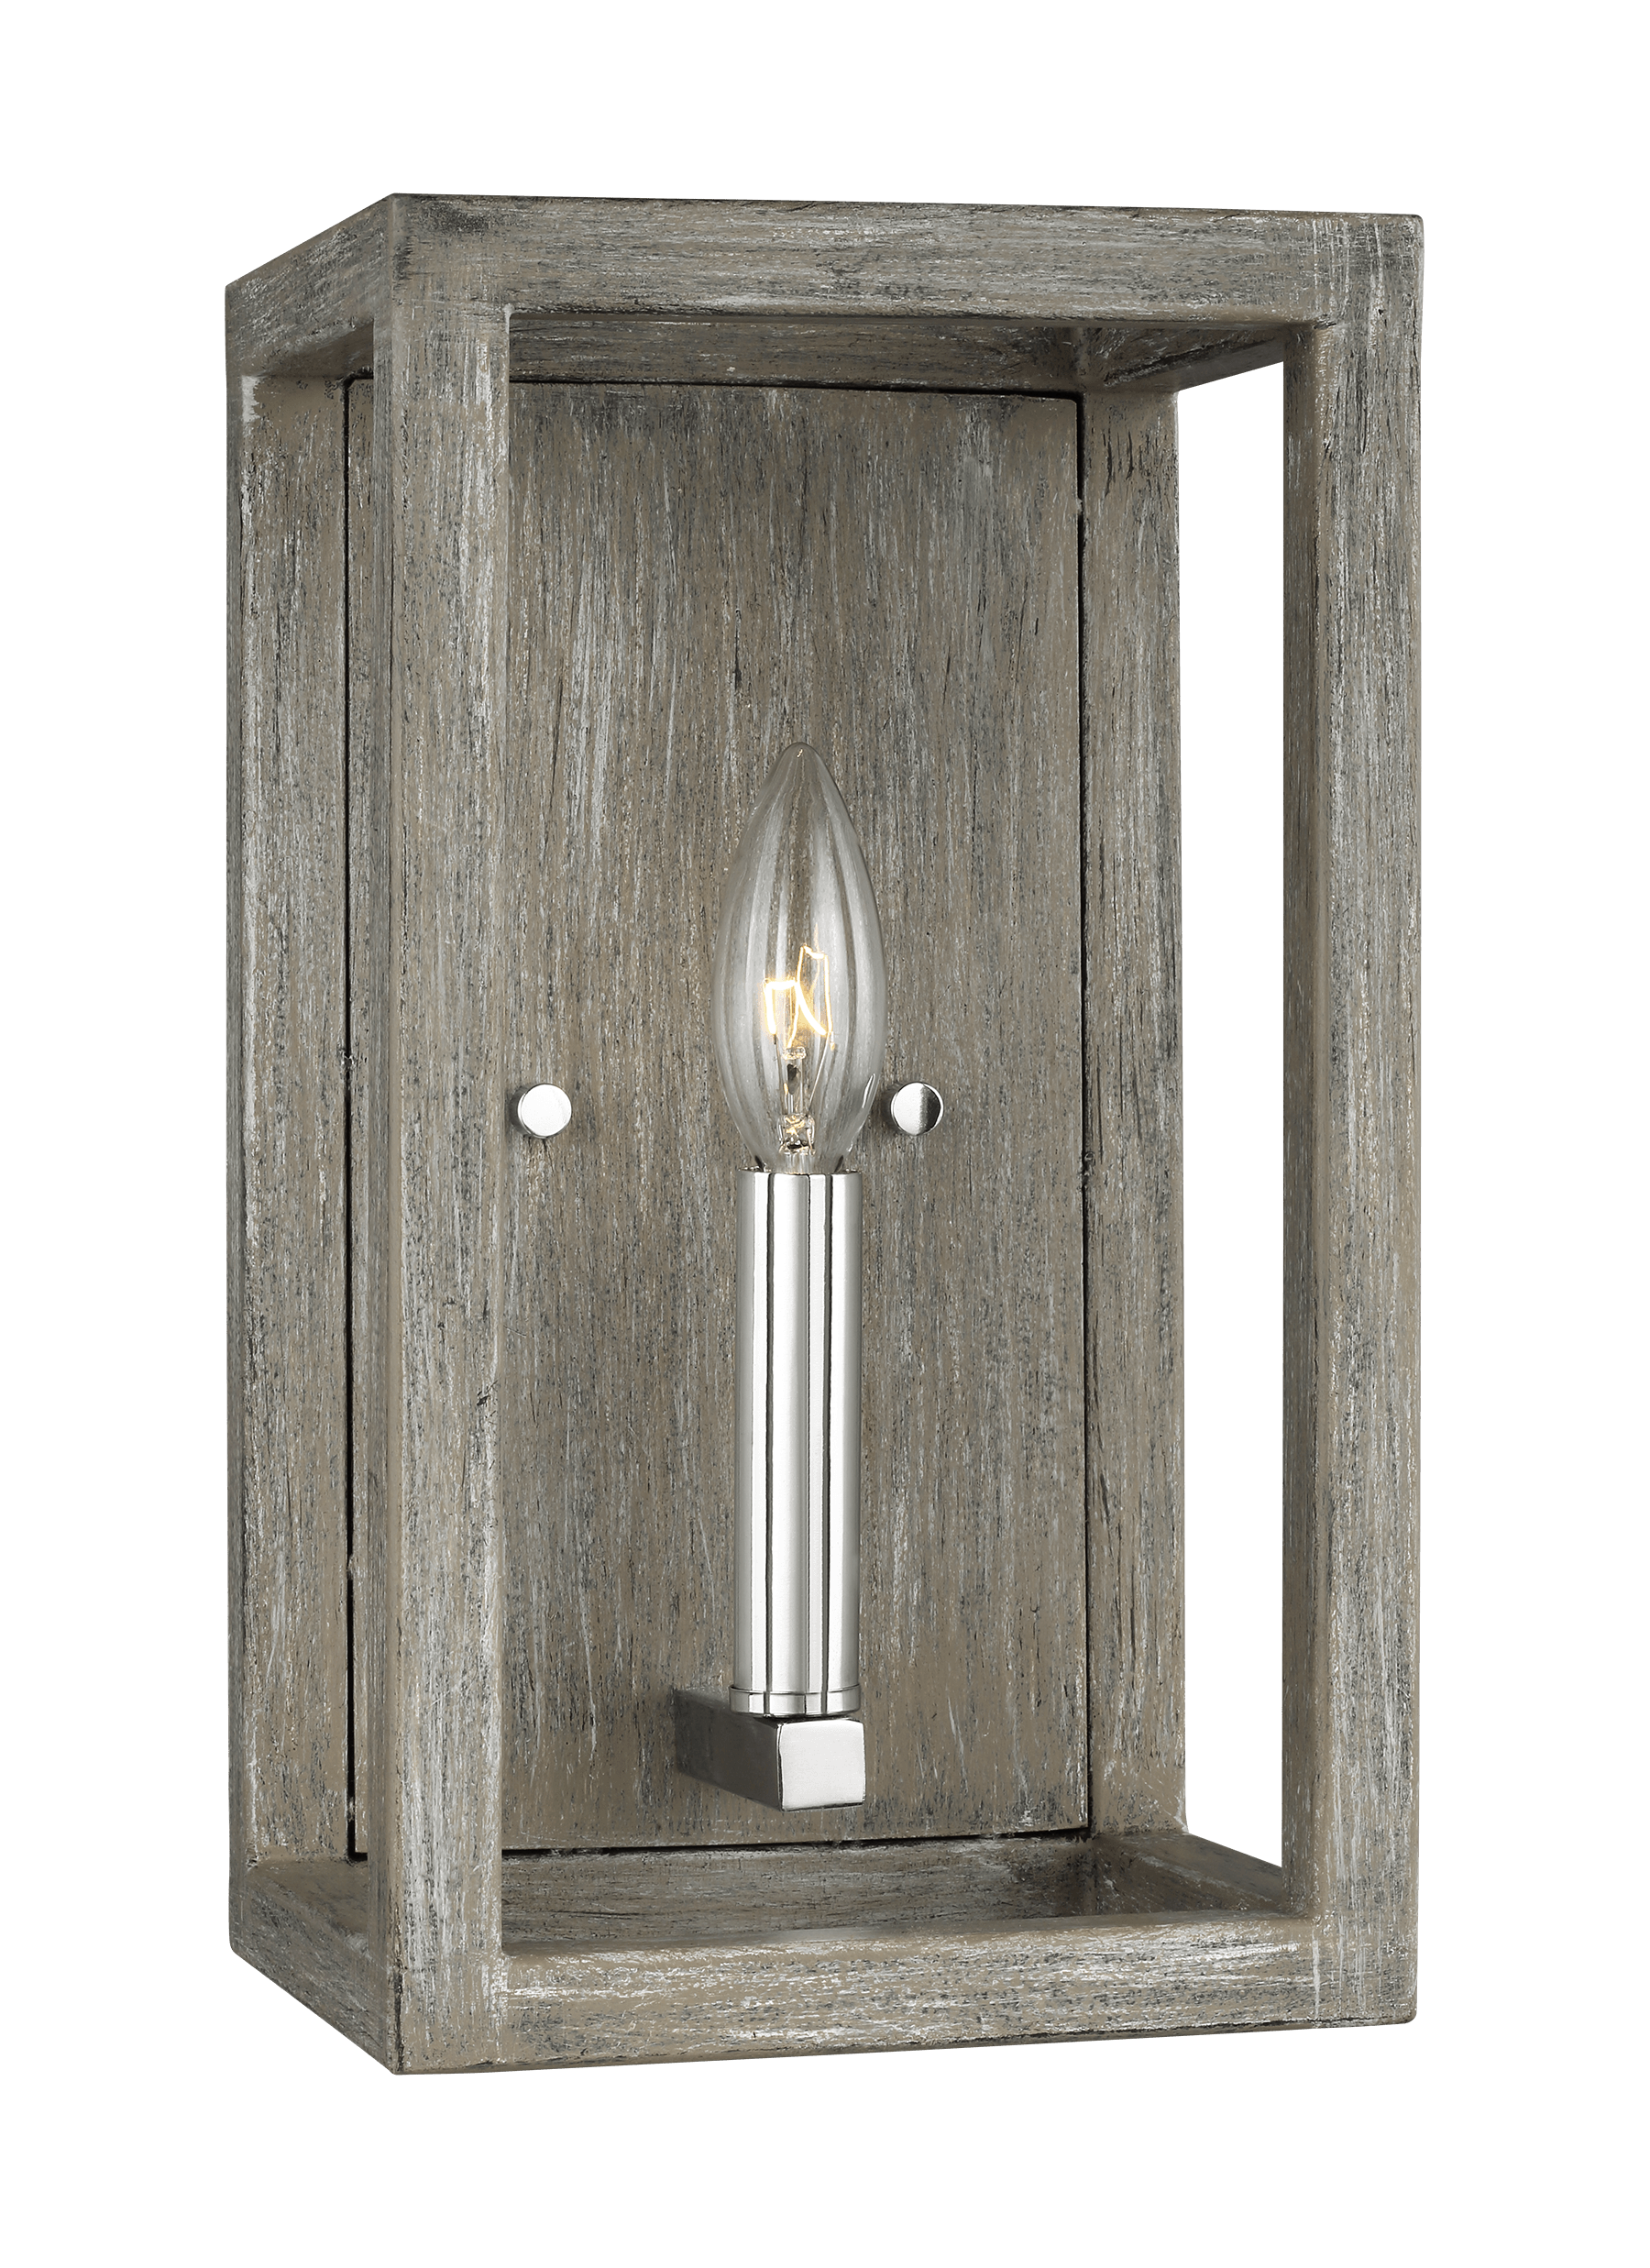 Moffet Street One Light Wall Sconce - Washed Pine / Chrome Wall Sea Gull Lighting 